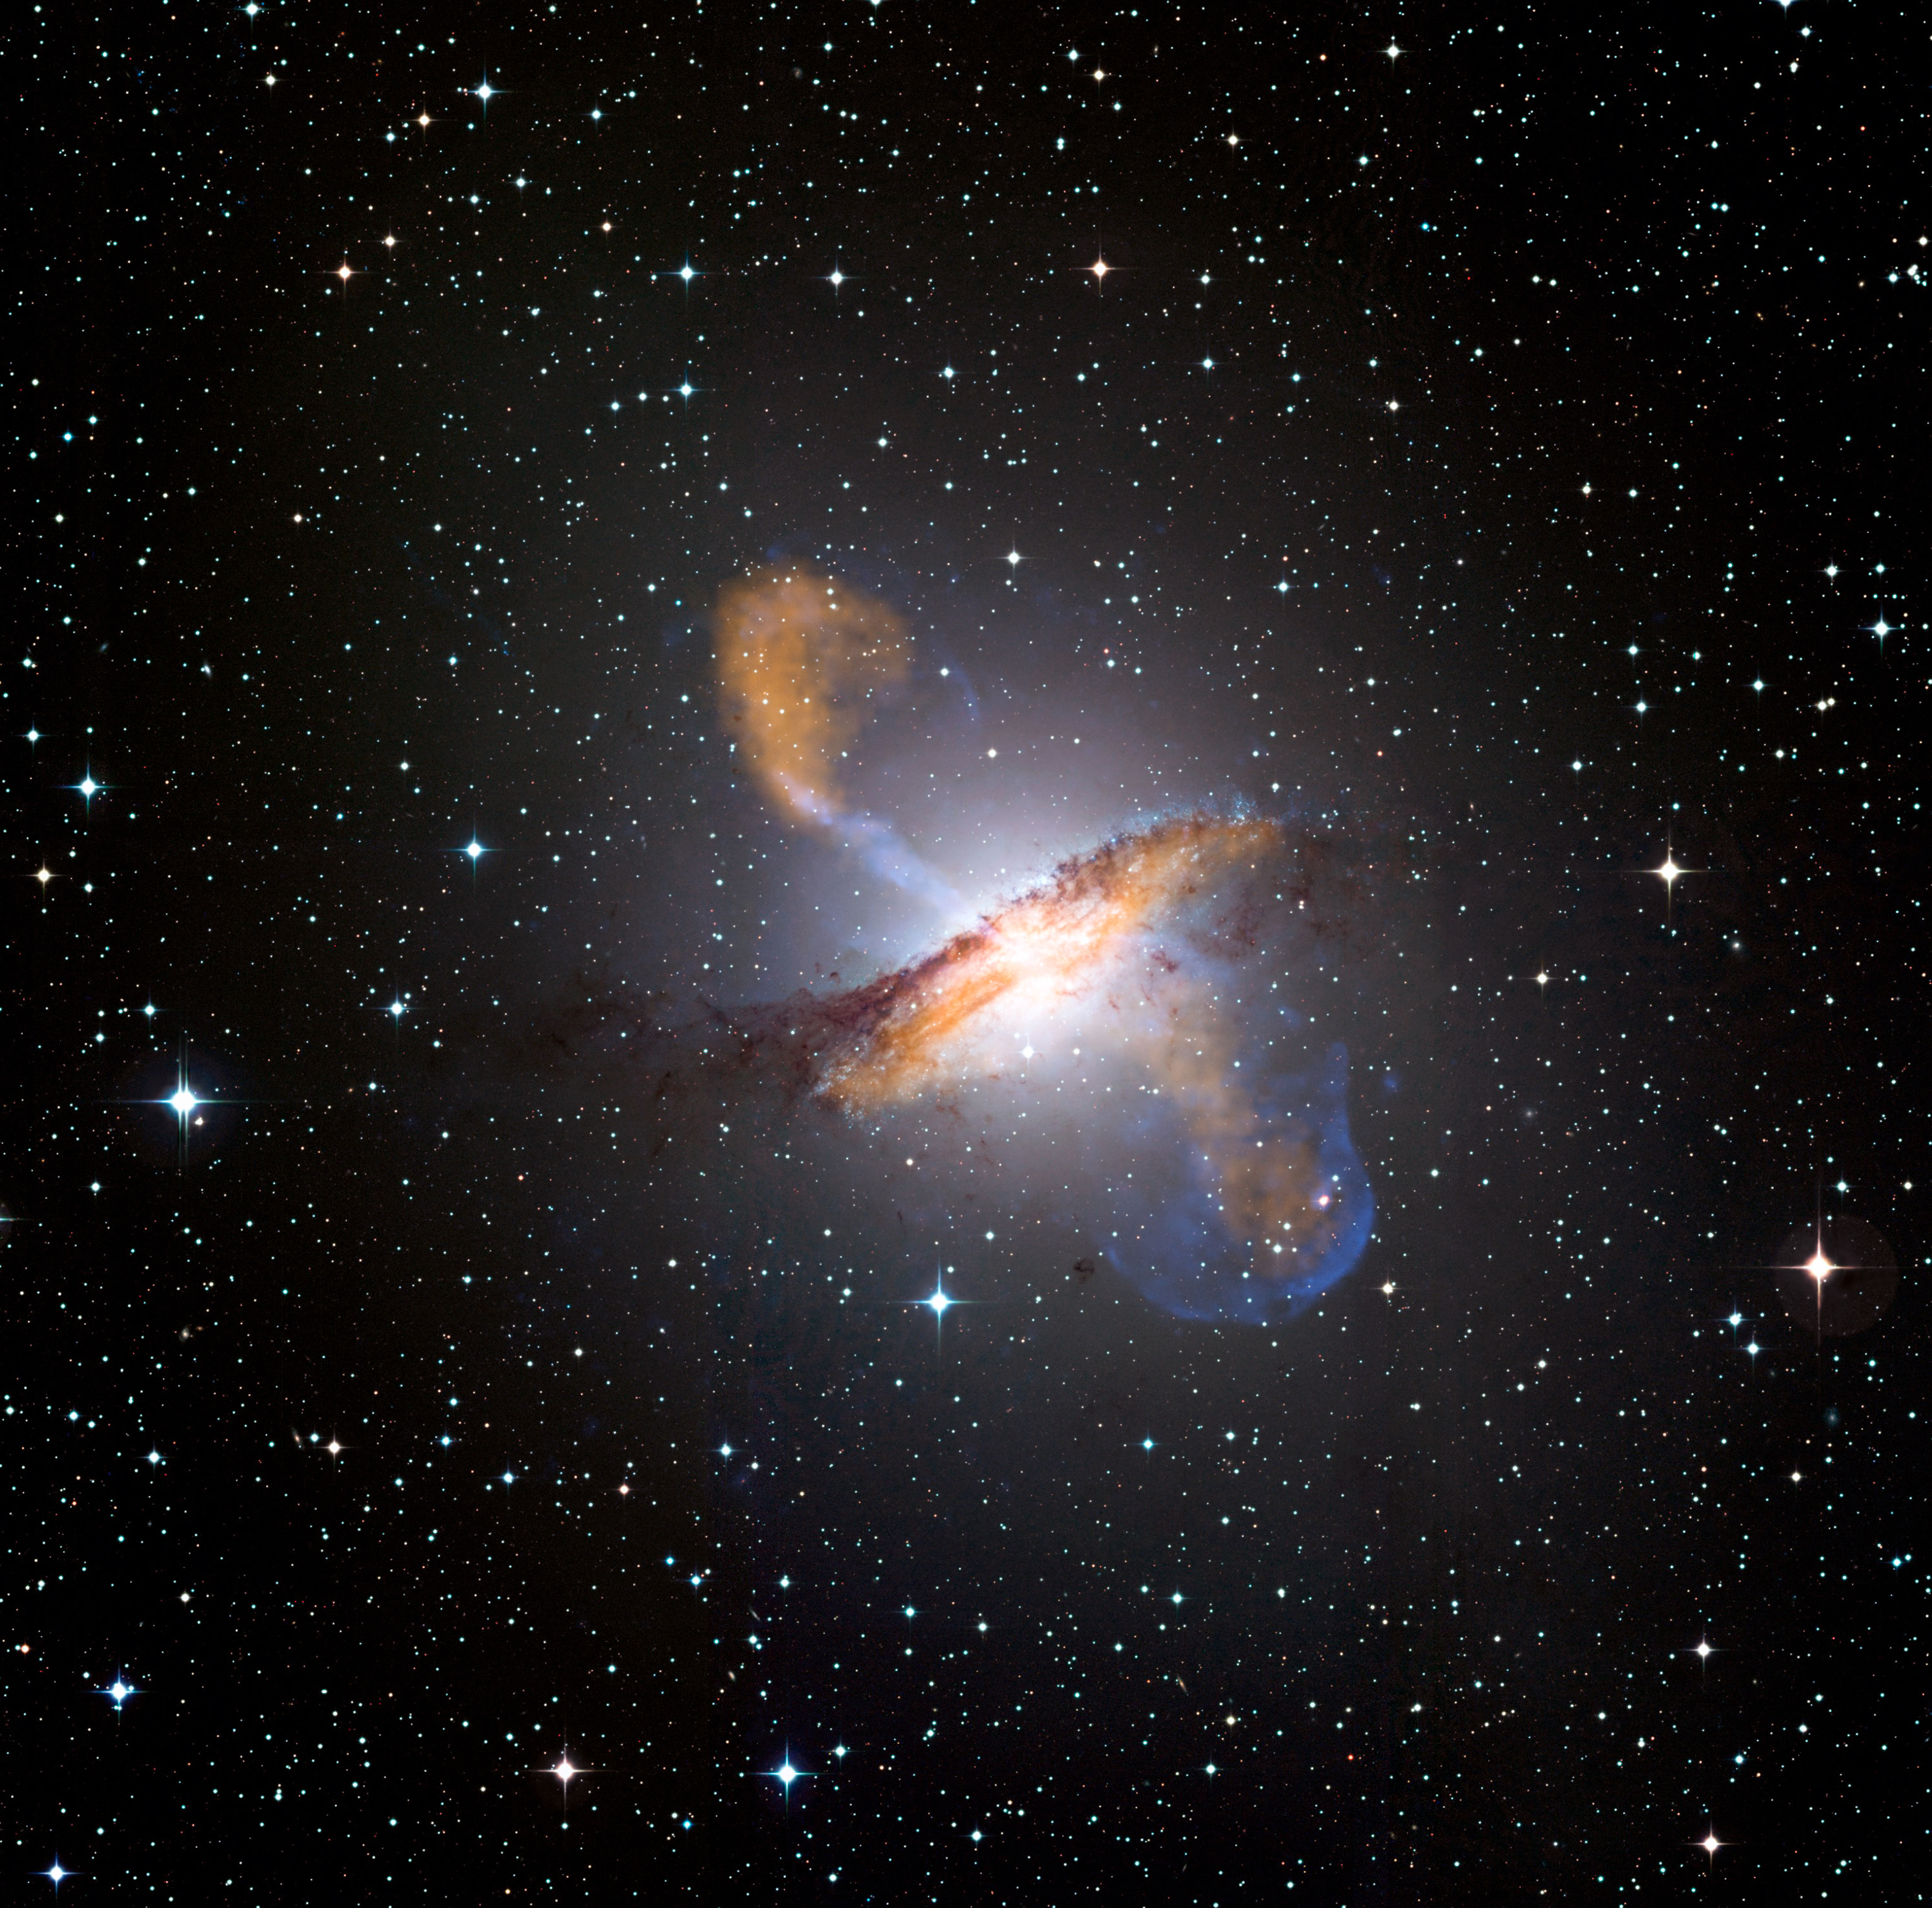 Don't get too close: A black hole in the galaxy Centaurus A emitting gas jets as it sucks in matter.